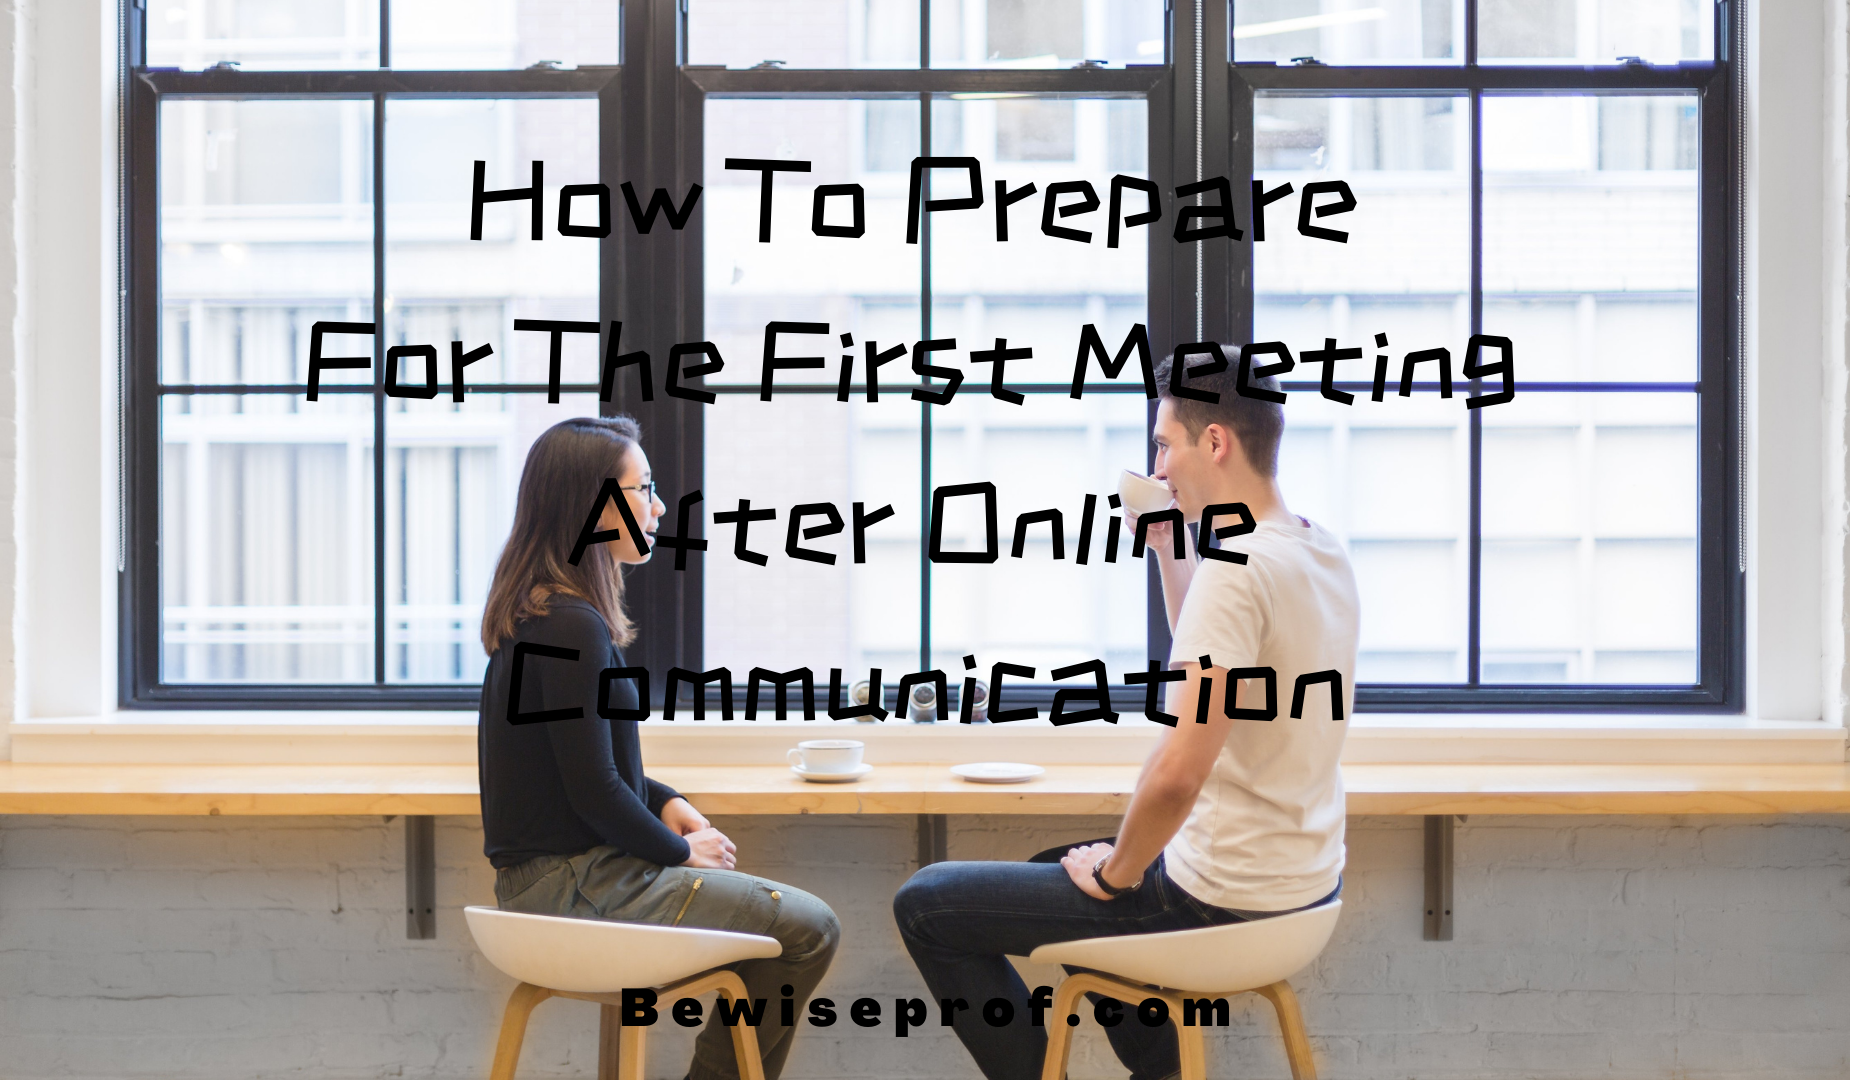 How To Prepare for the First Meeting After Online Communication